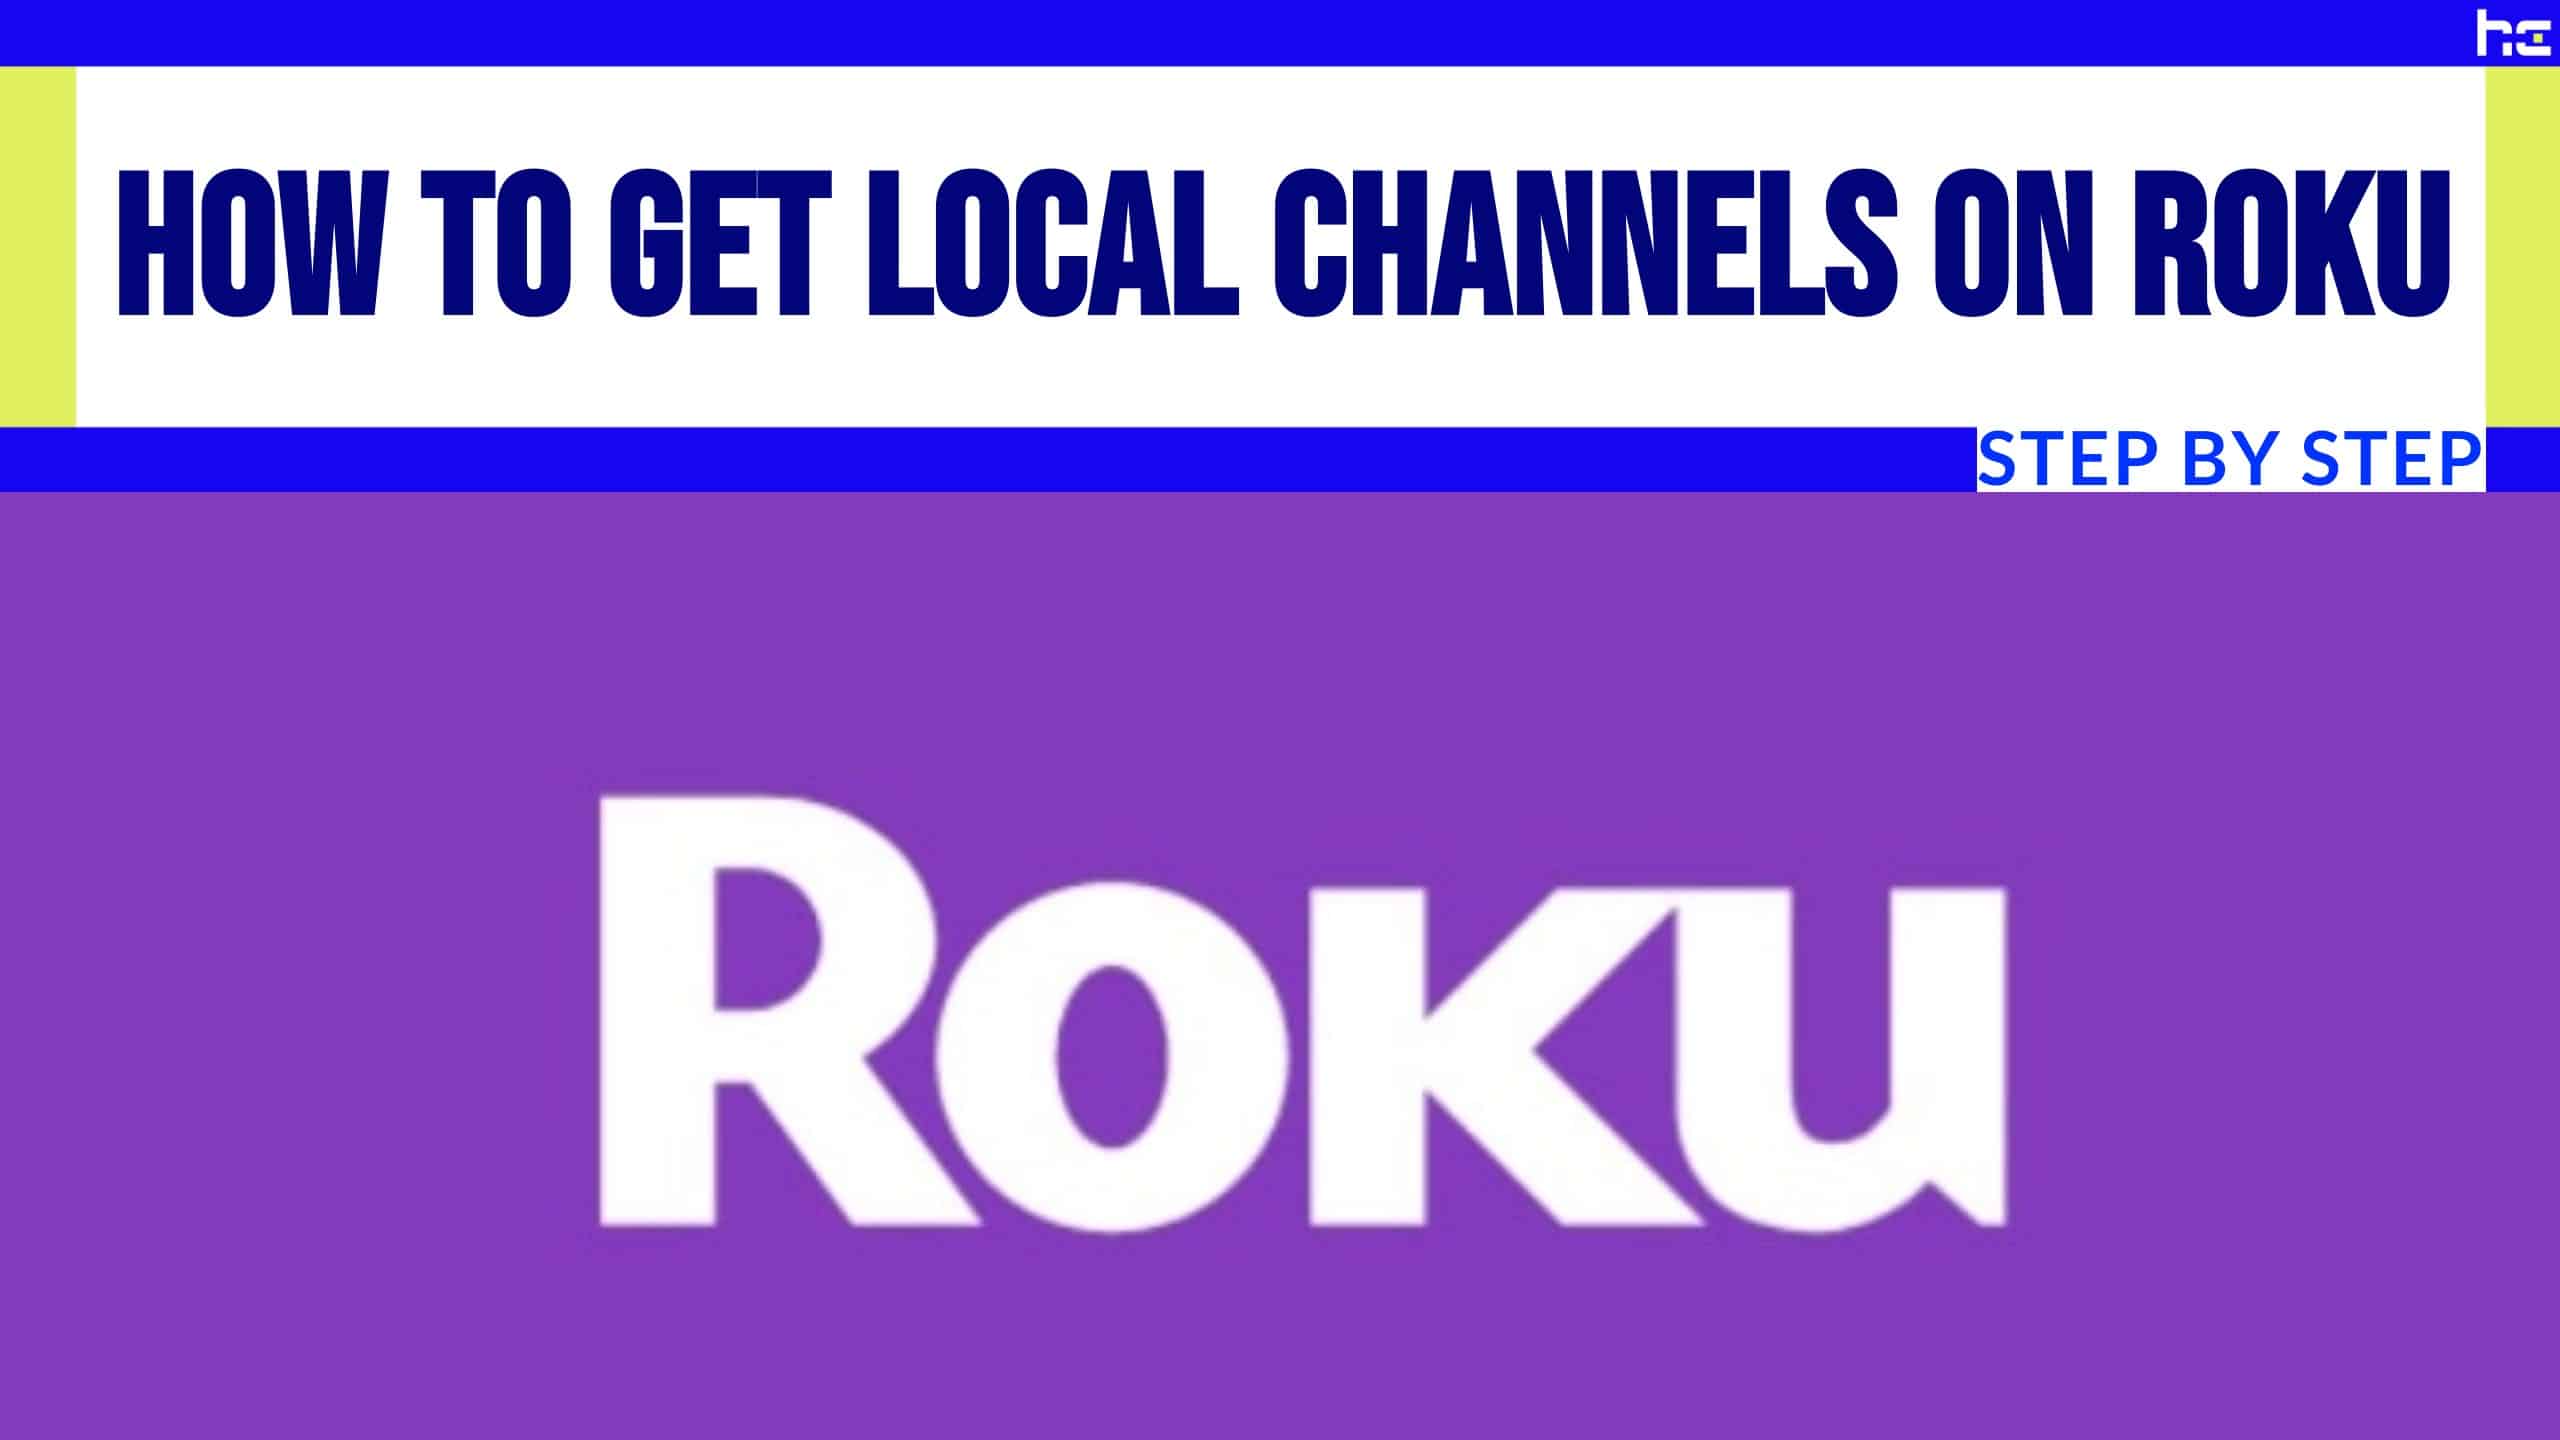 How To Get Local Channels On Roku, Step By Step